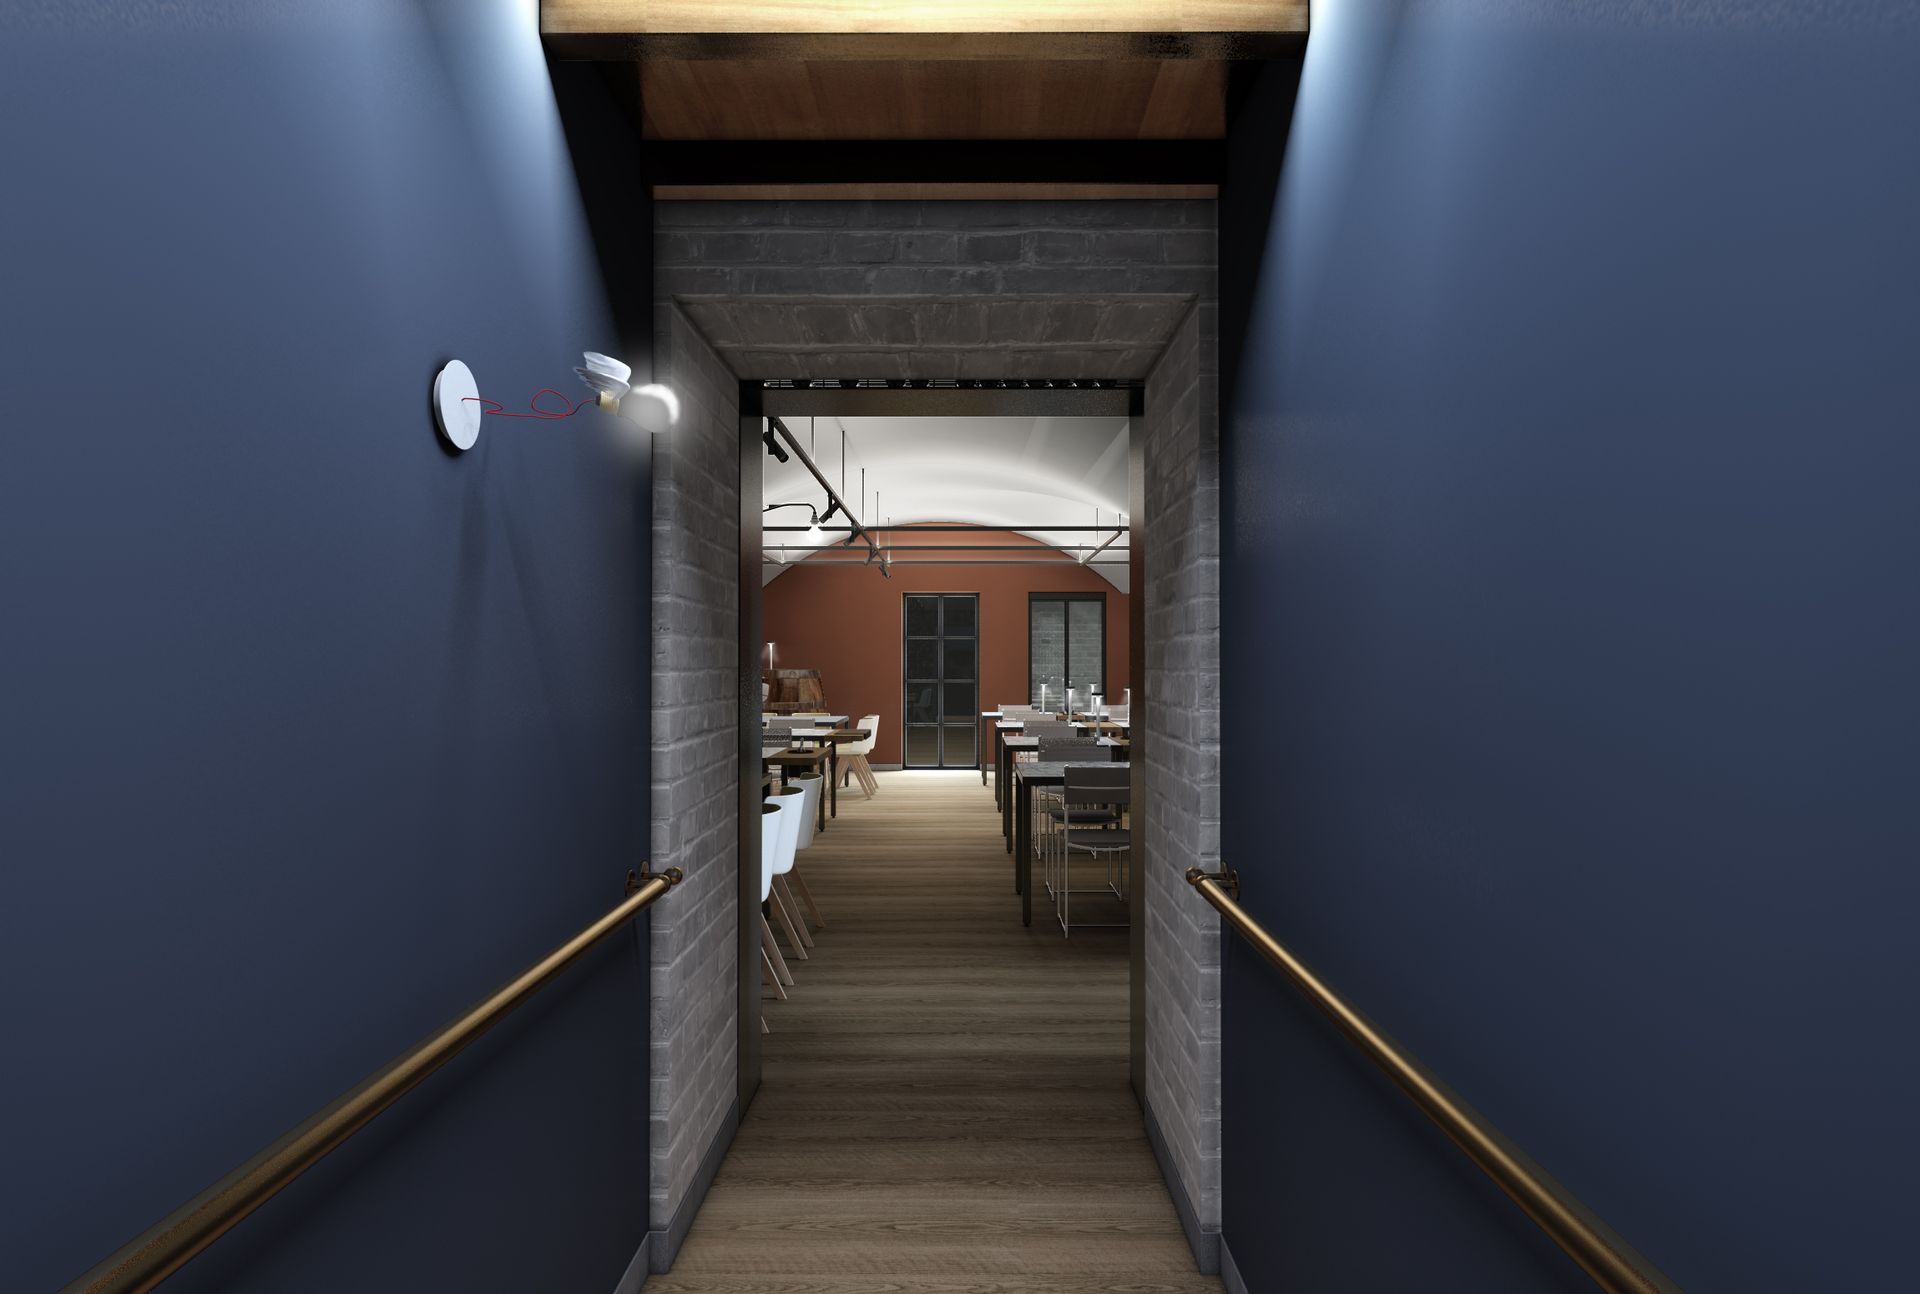 Interior design project, bistrot restaurant renovation with barrel vaults, exposed bricks and convivium table. Officina Magisafi architecture design - entrance